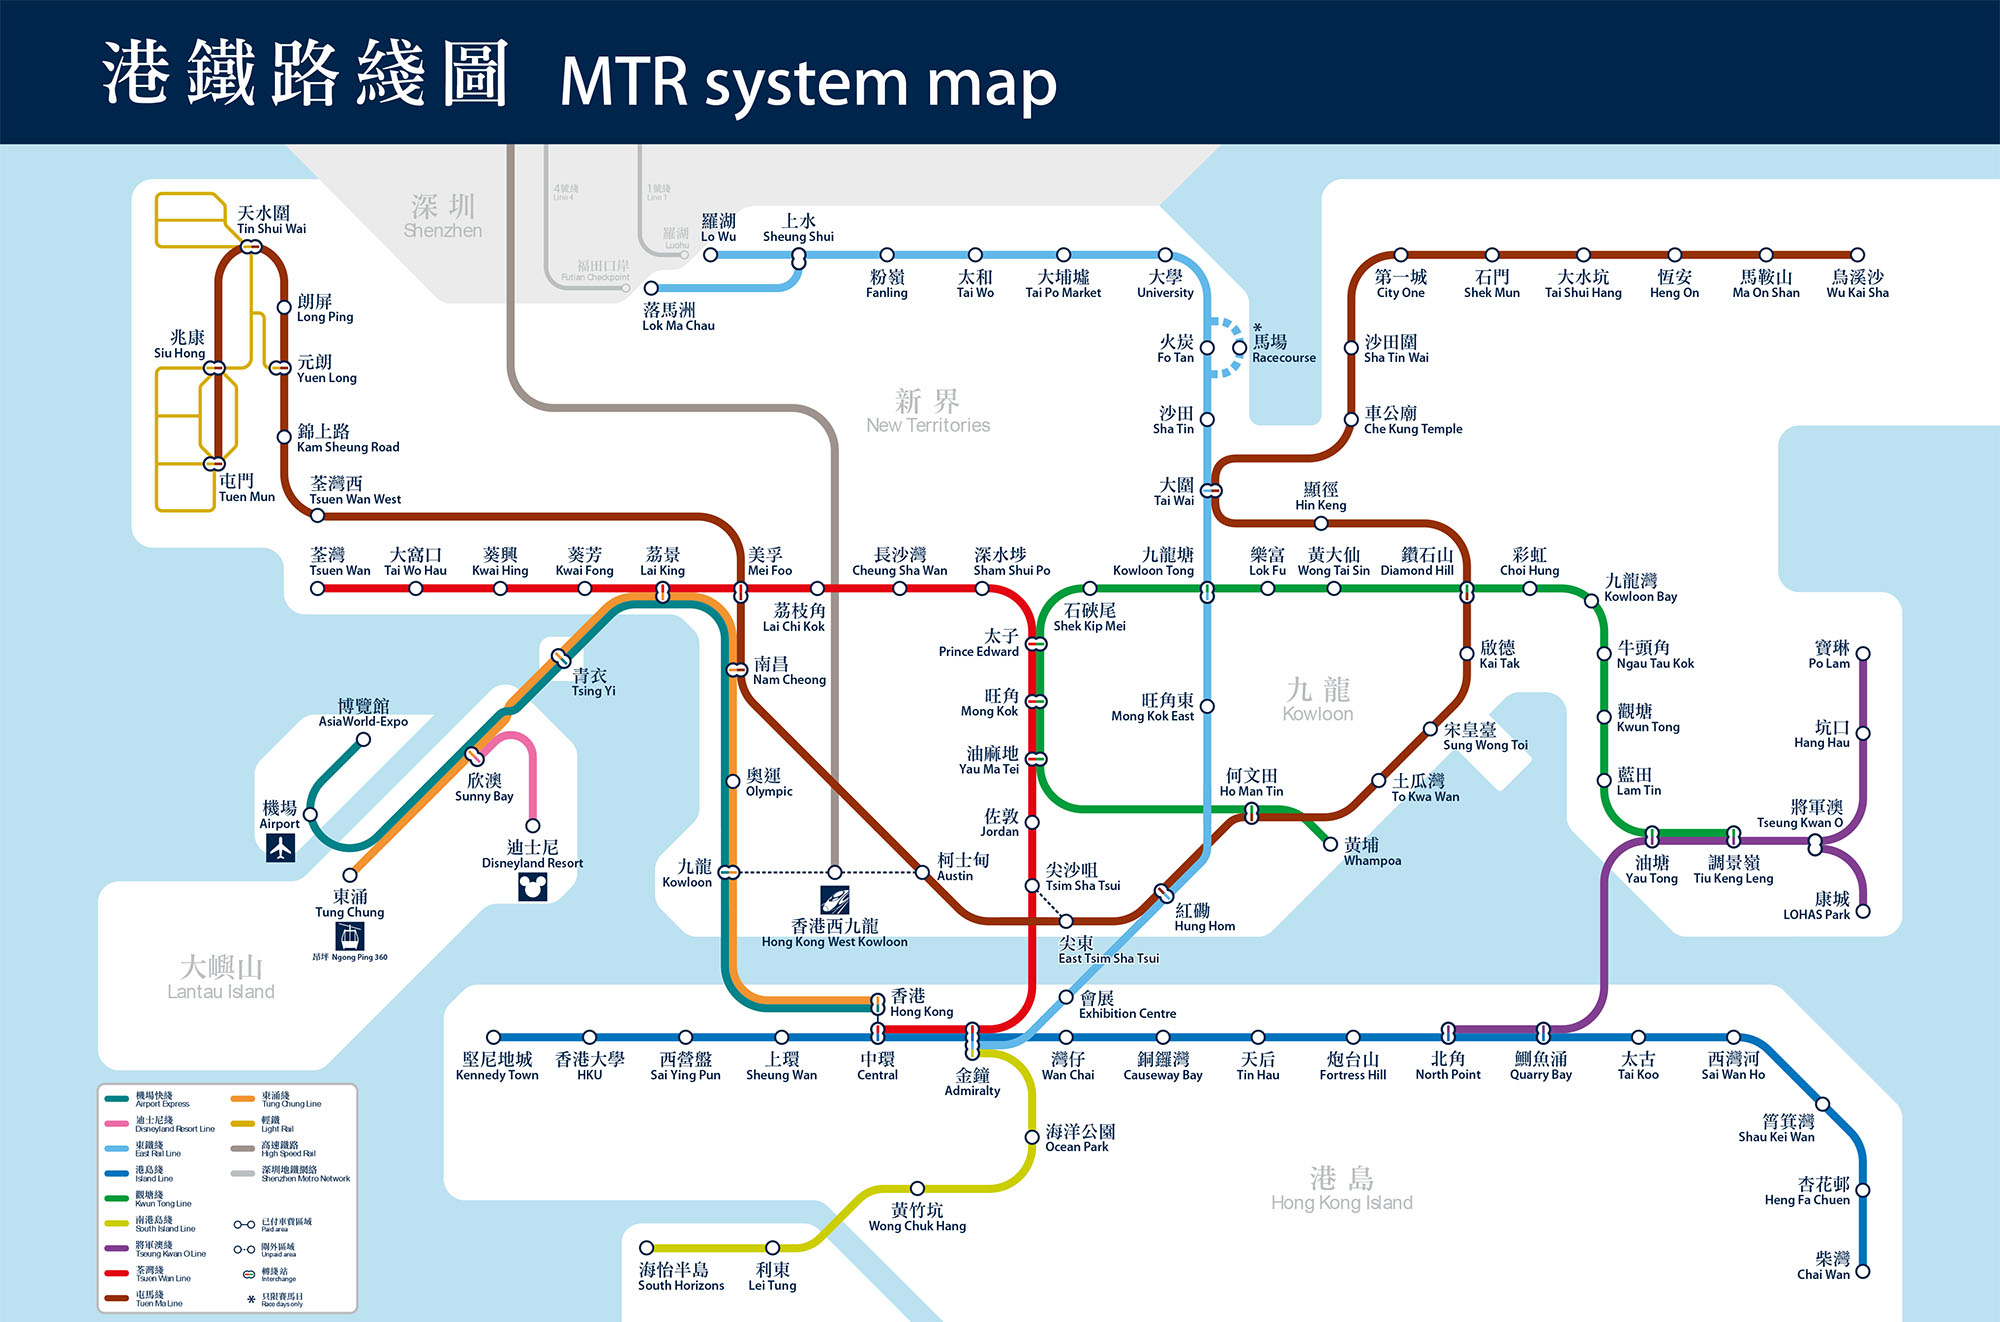 Japanese-Lessons-Covering-MTR-Routemap-2016